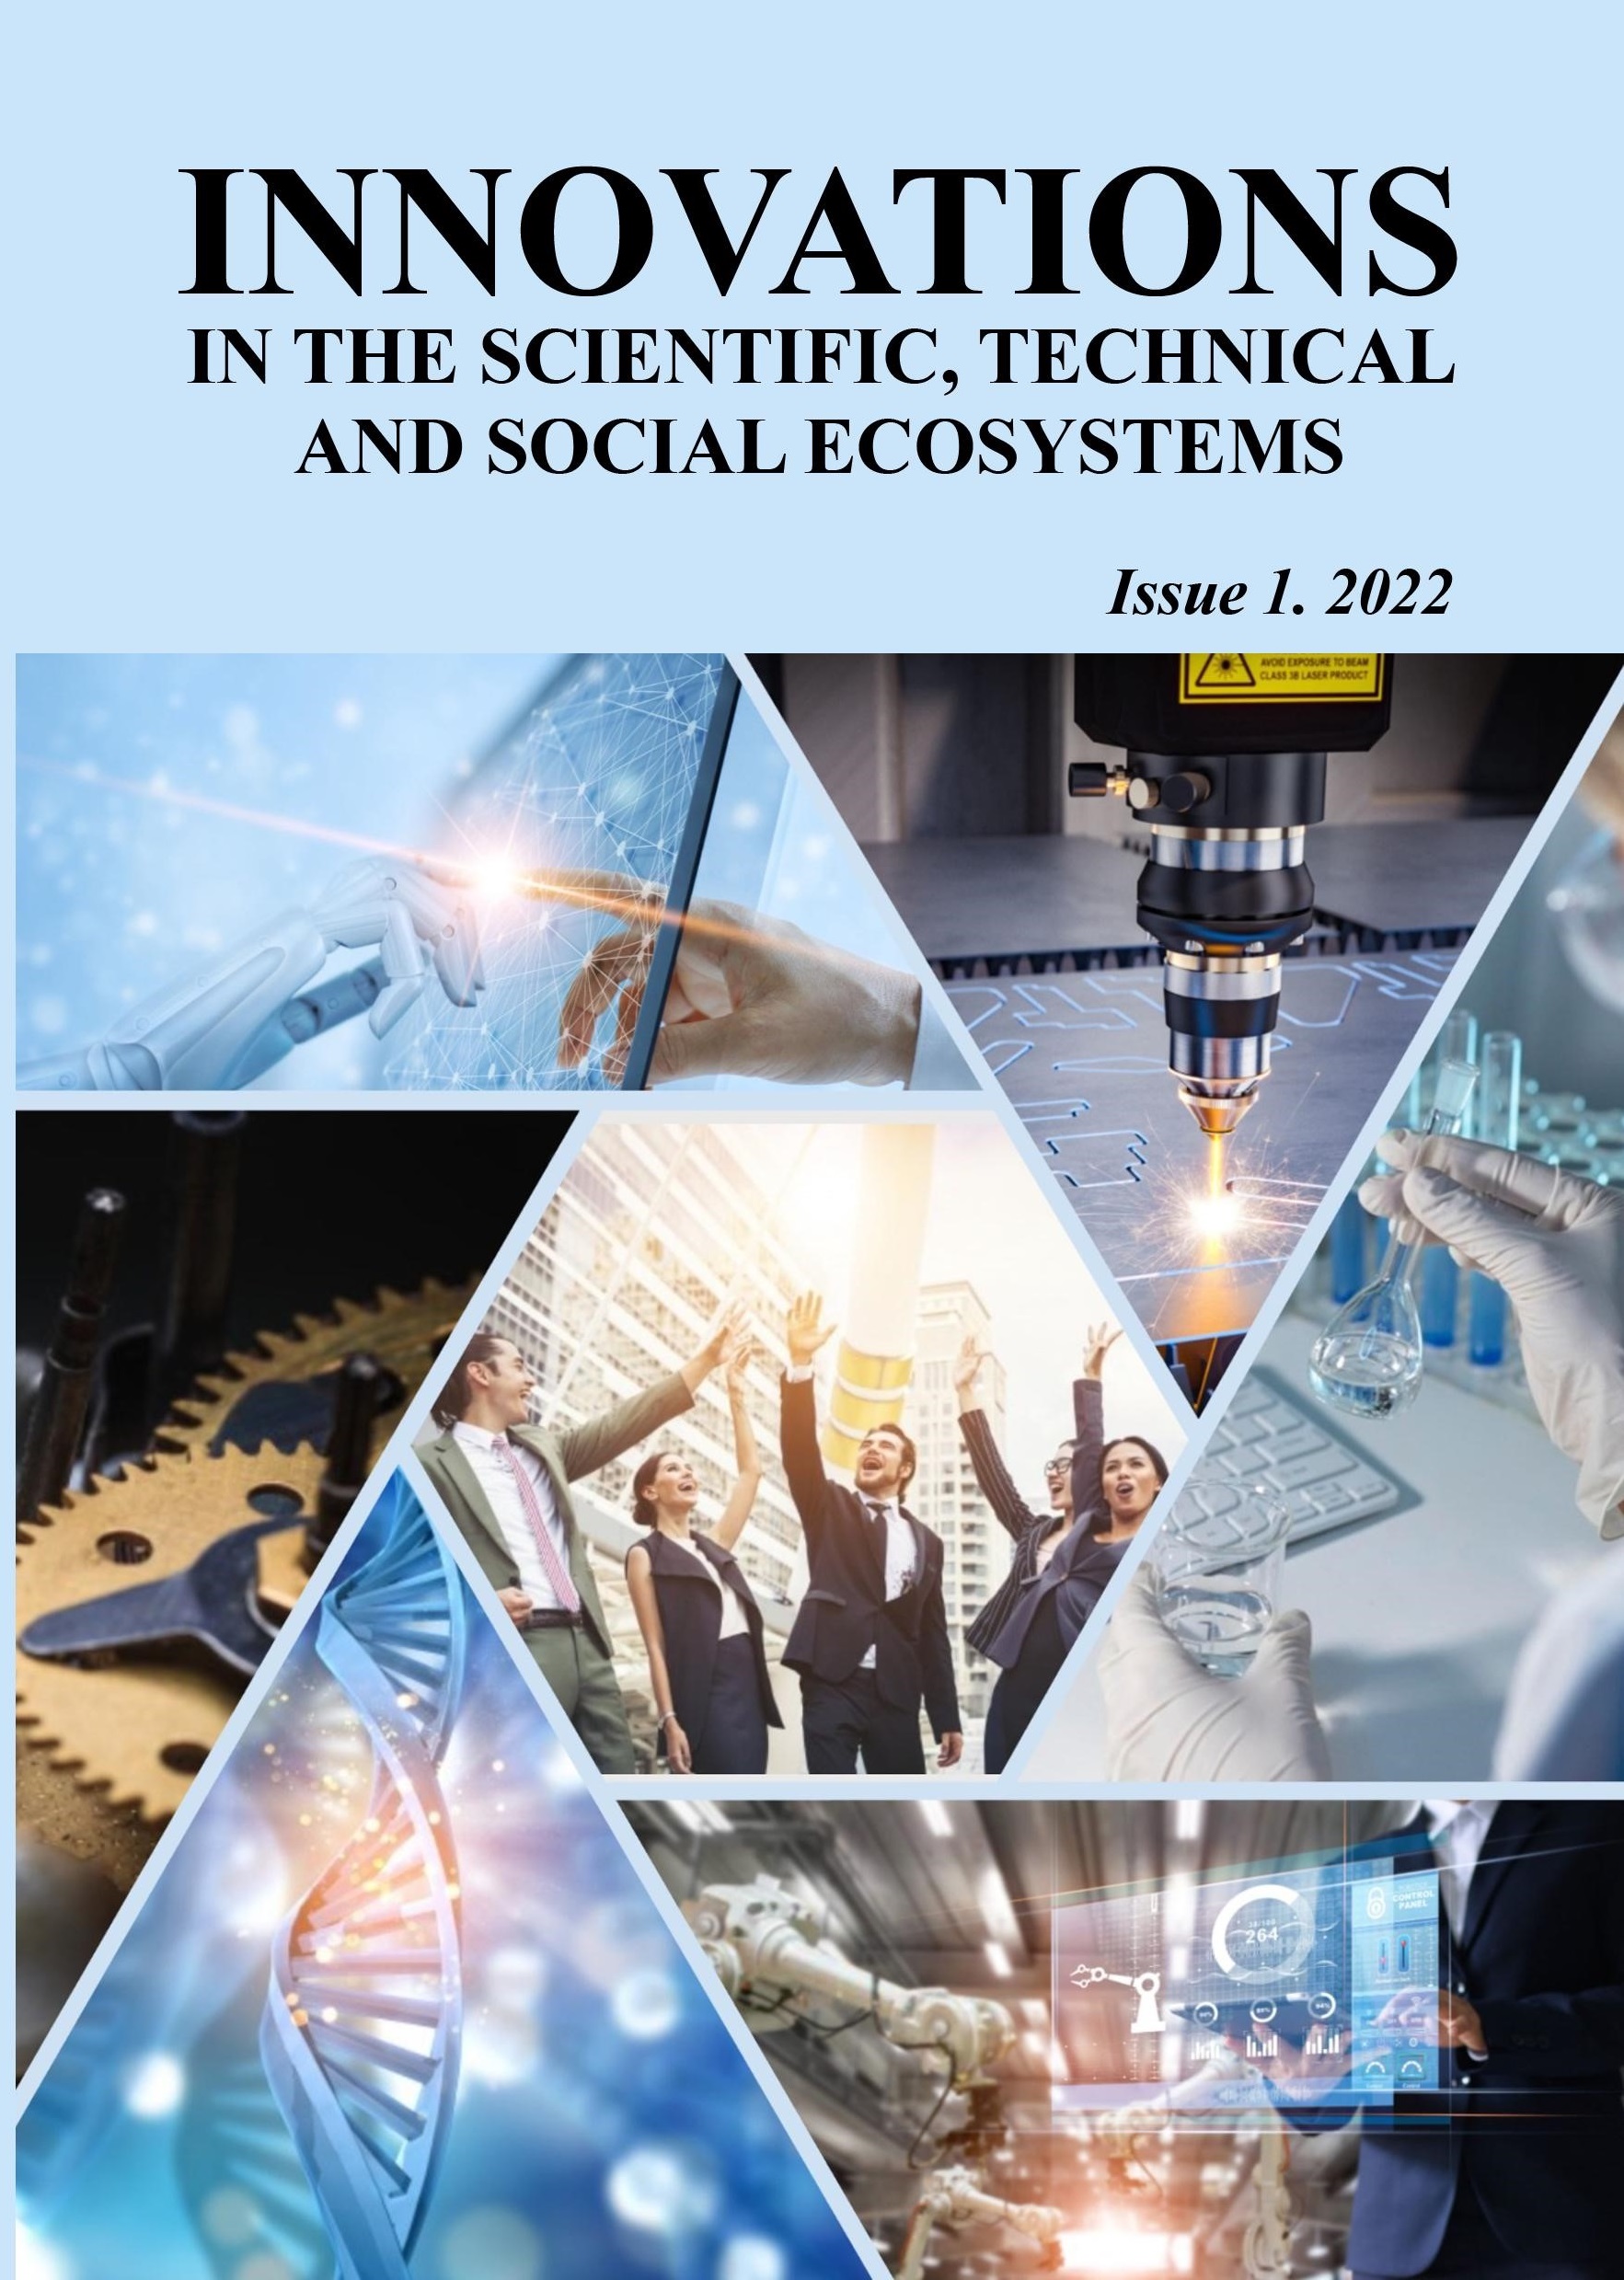 					View Vol. 1 No. 1 (2022): INNOVATIONS IN THE SCIENTIFIC, TECHNICAL AND SOCIAL ECOSYSTEMS
				